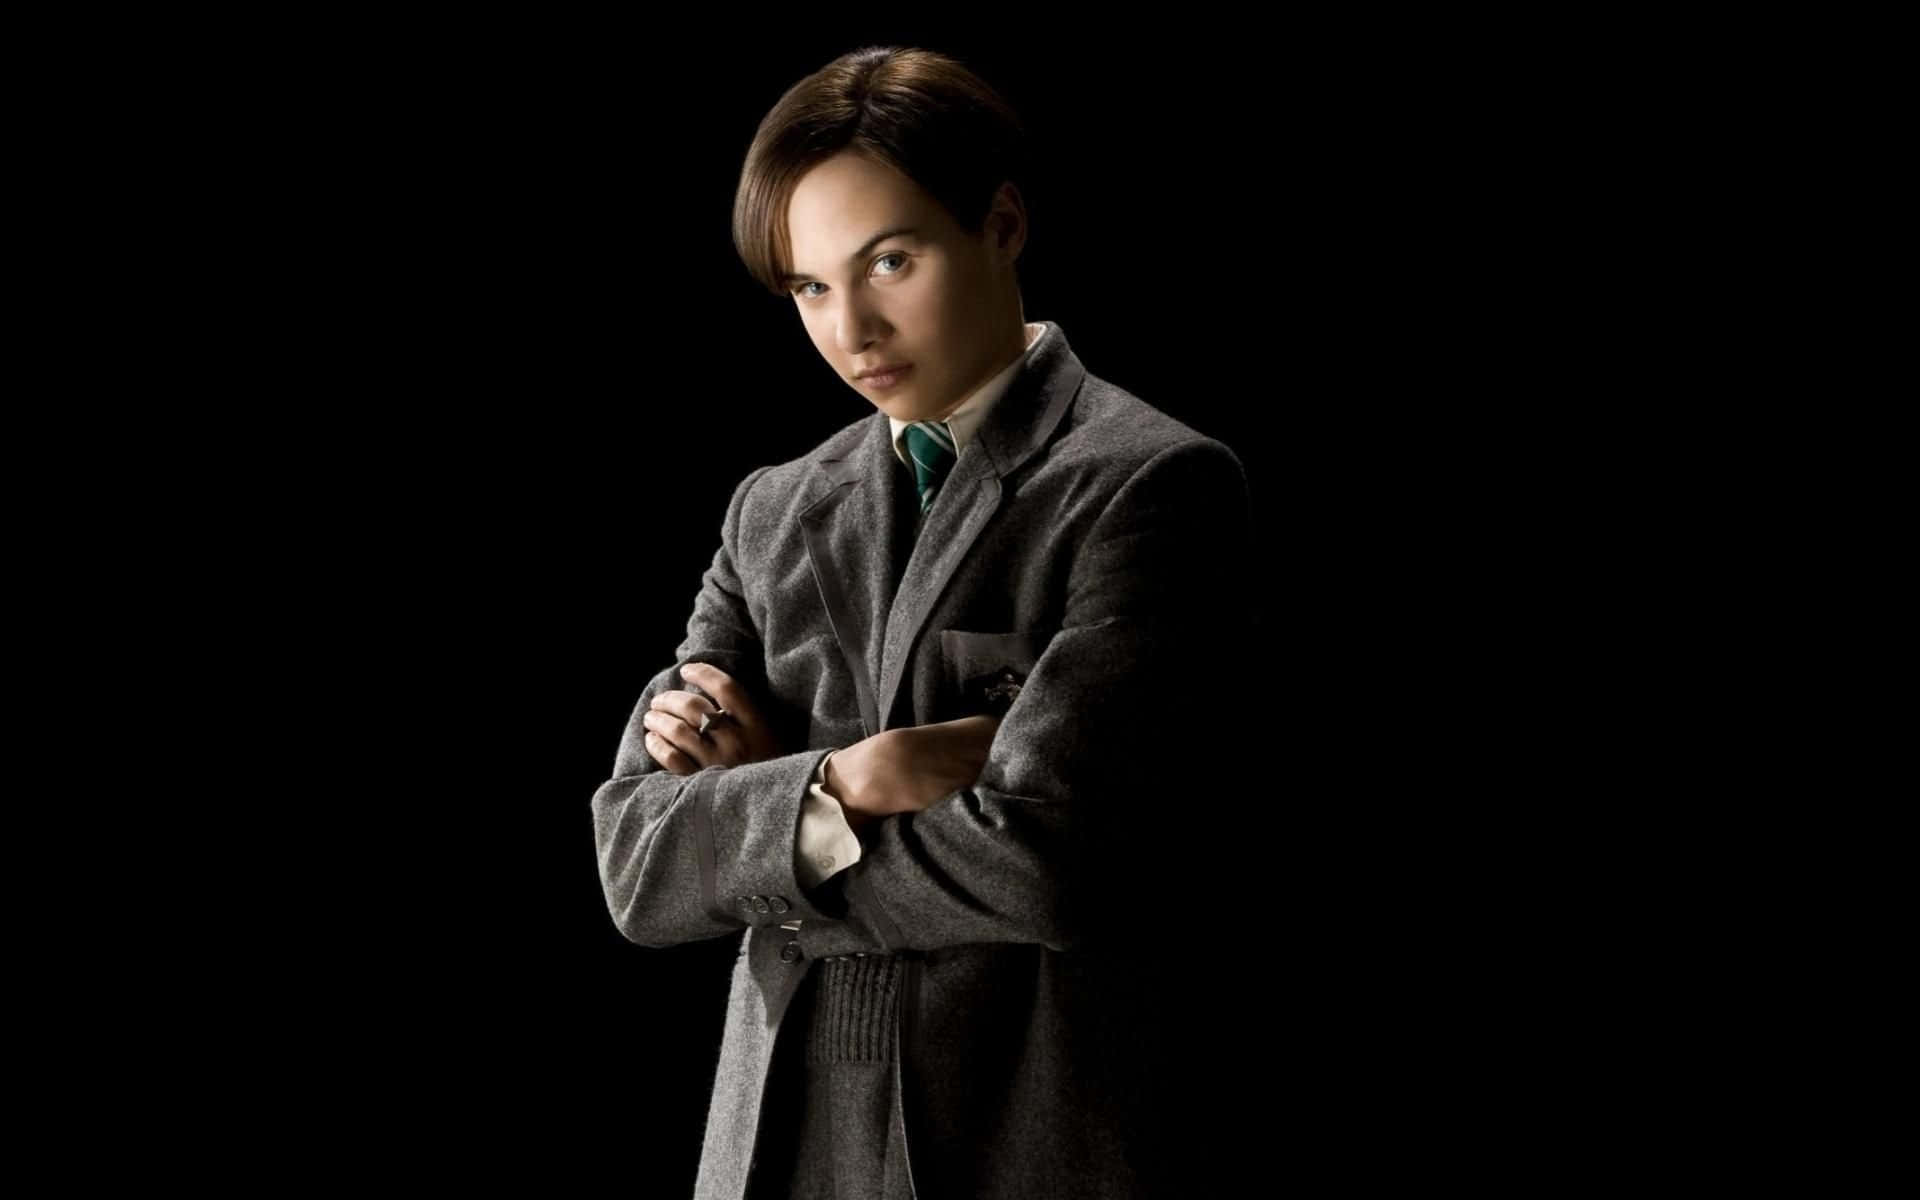 Intriguing, young Tom Riddle with a dark glint in his eyes. Wallpaper